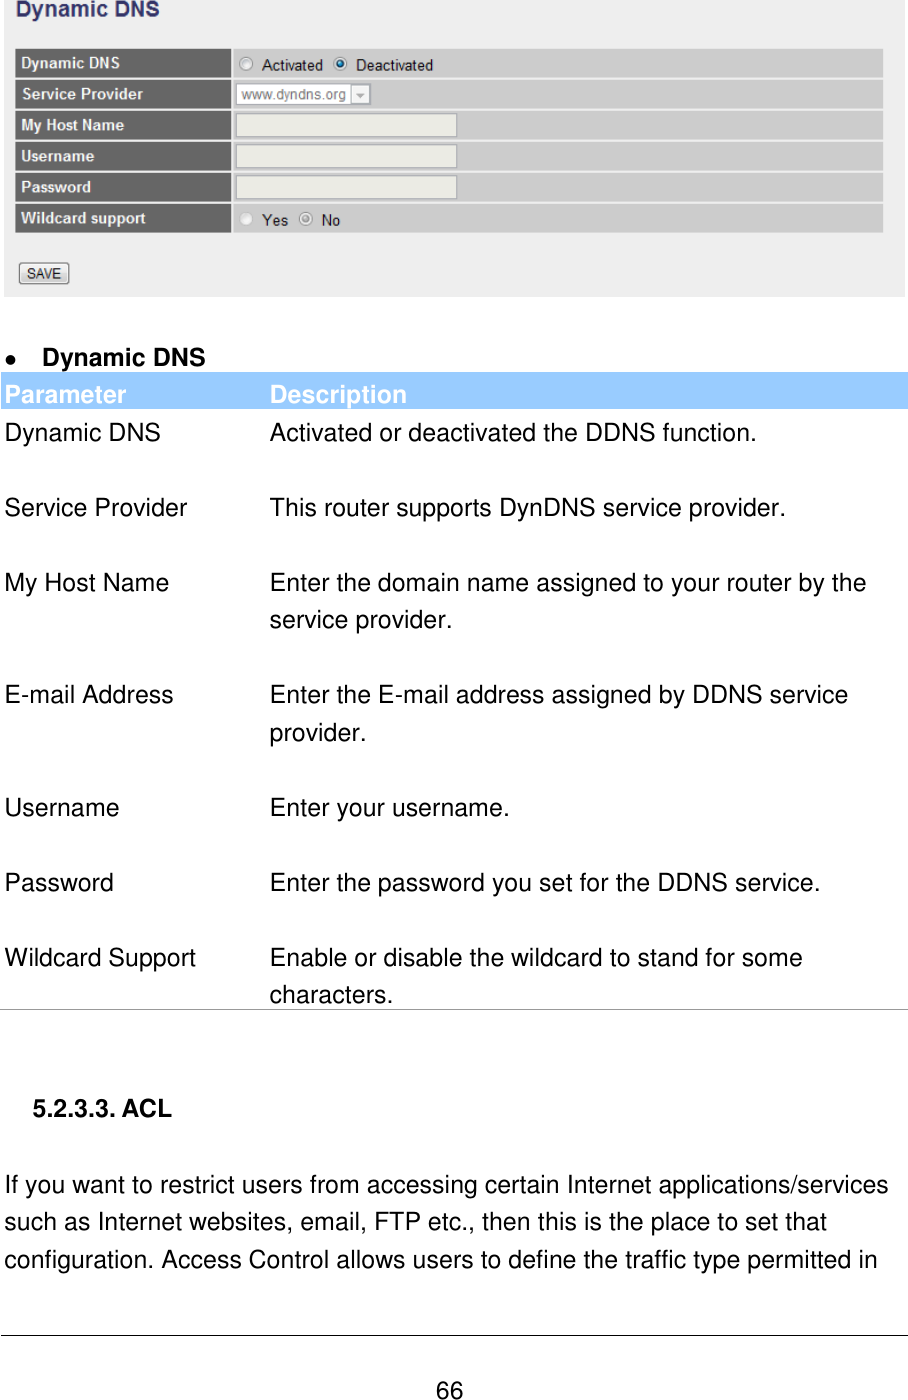   66    Dynamic DNS Parameter Description Dynamic DNS Activated or deactivated the DDNS function.   Service Provider This router supports DynDNS service provider.   My Host Name Enter the domain name assigned to your router by the service provider.   E-mail Address Enter the E-mail address assigned by DDNS service provider.   Username Enter your username.   Password Enter the password you set for the DDNS service.   Wildcard Support Enable or disable the wildcard to stand for some characters.   5.2.3.3. ACL  If you want to restrict users from accessing certain Internet applications/services such as Internet websites, email, FTP etc., then this is the place to set that configuration. Access Control allows users to define the traffic type permitted in 